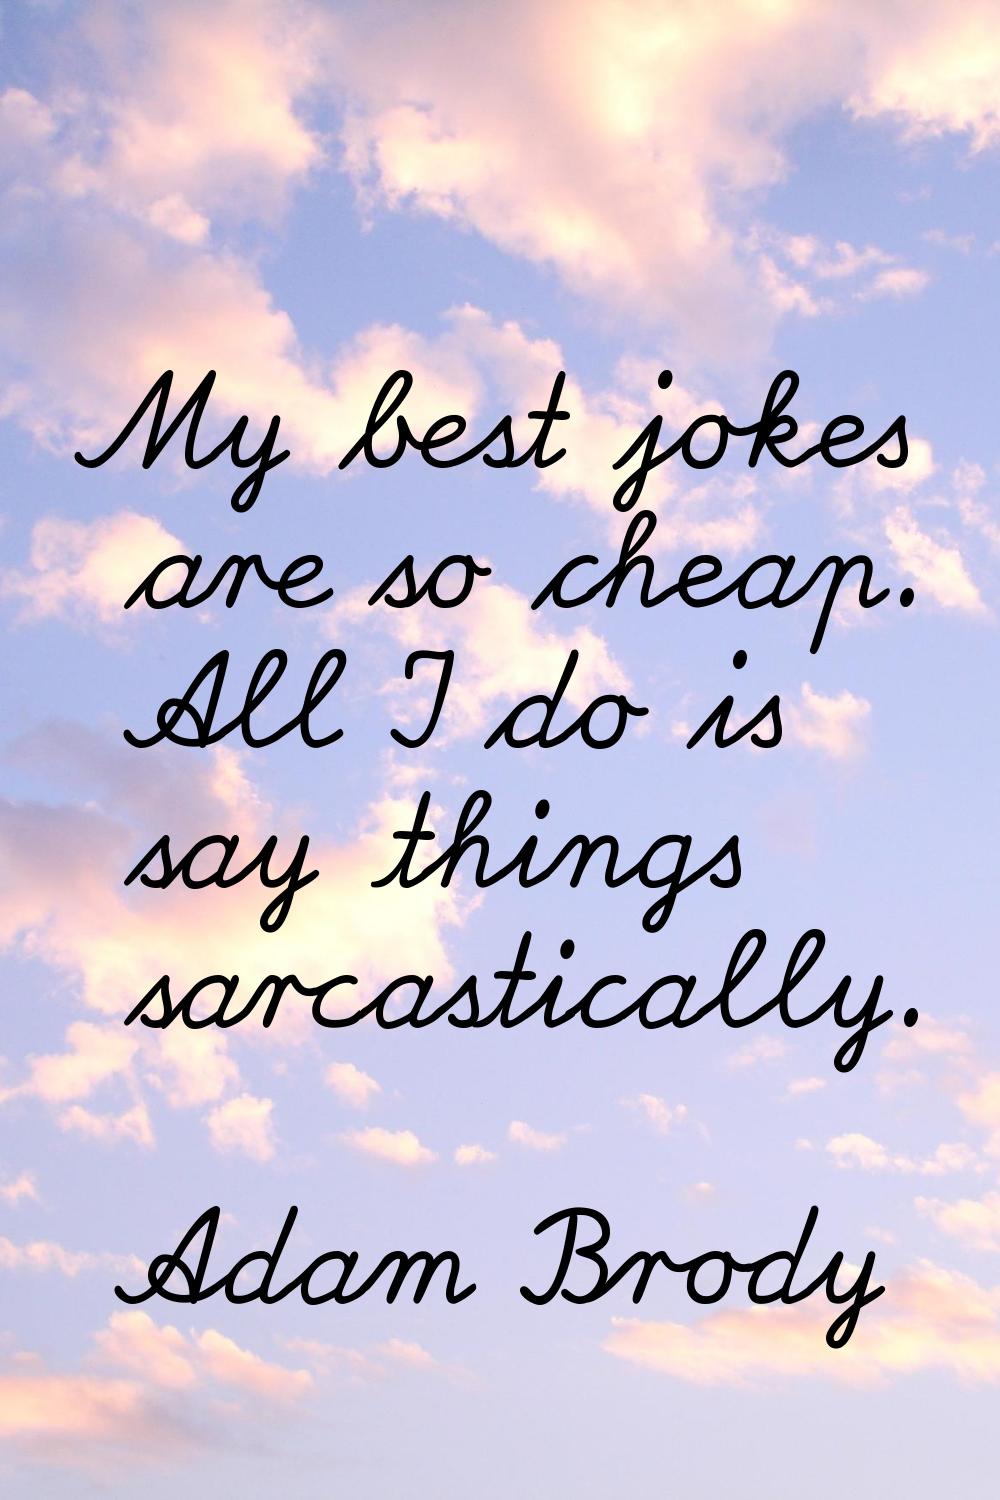 My best jokes are so cheap. All I do is say things sarcastically.